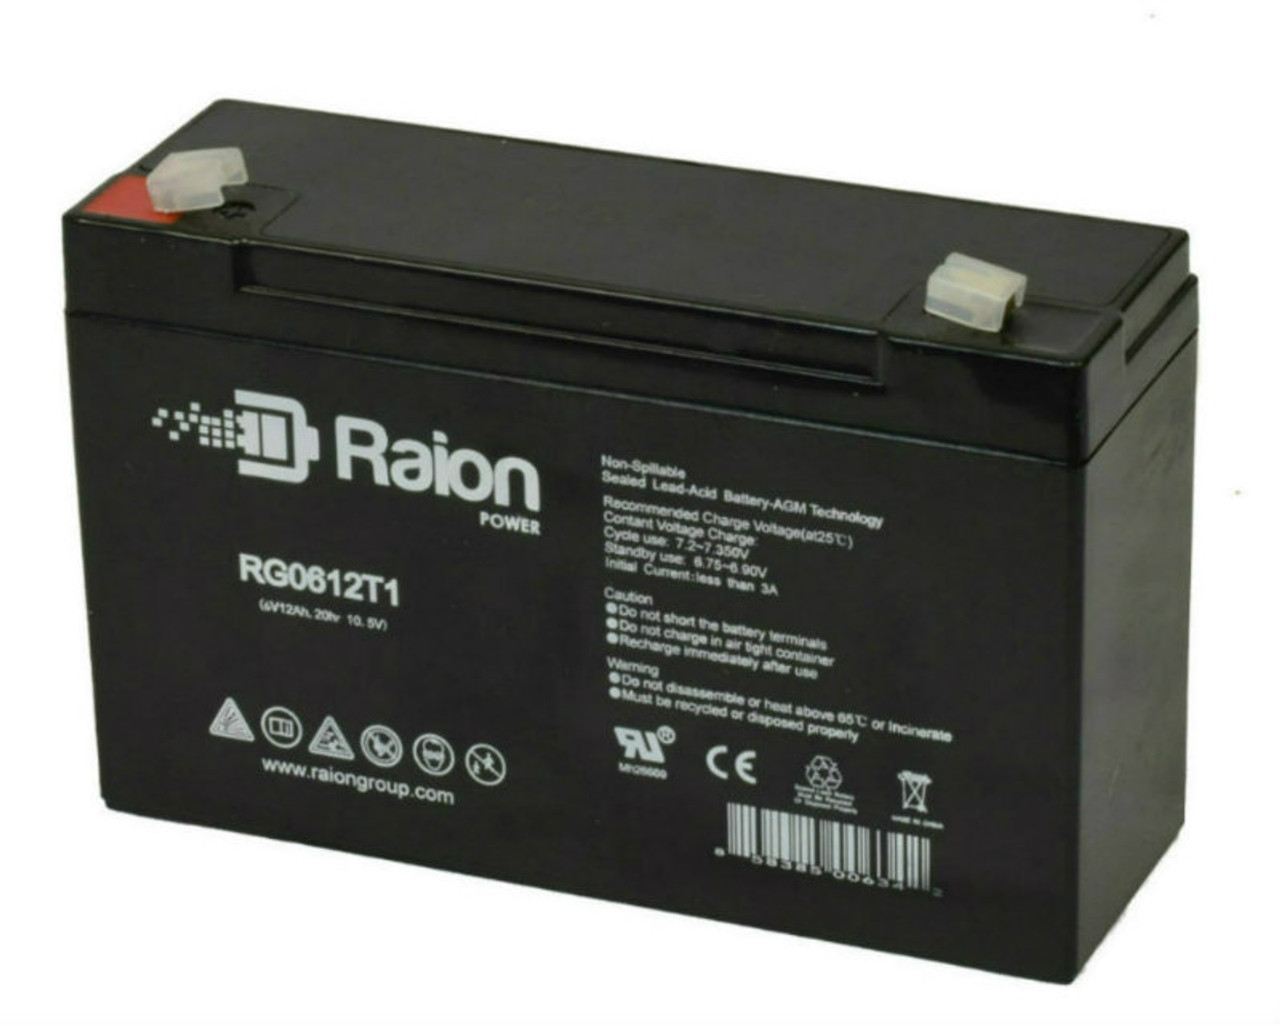 Raion Power RG06120T1 Replacement Battery for Vision CP6120